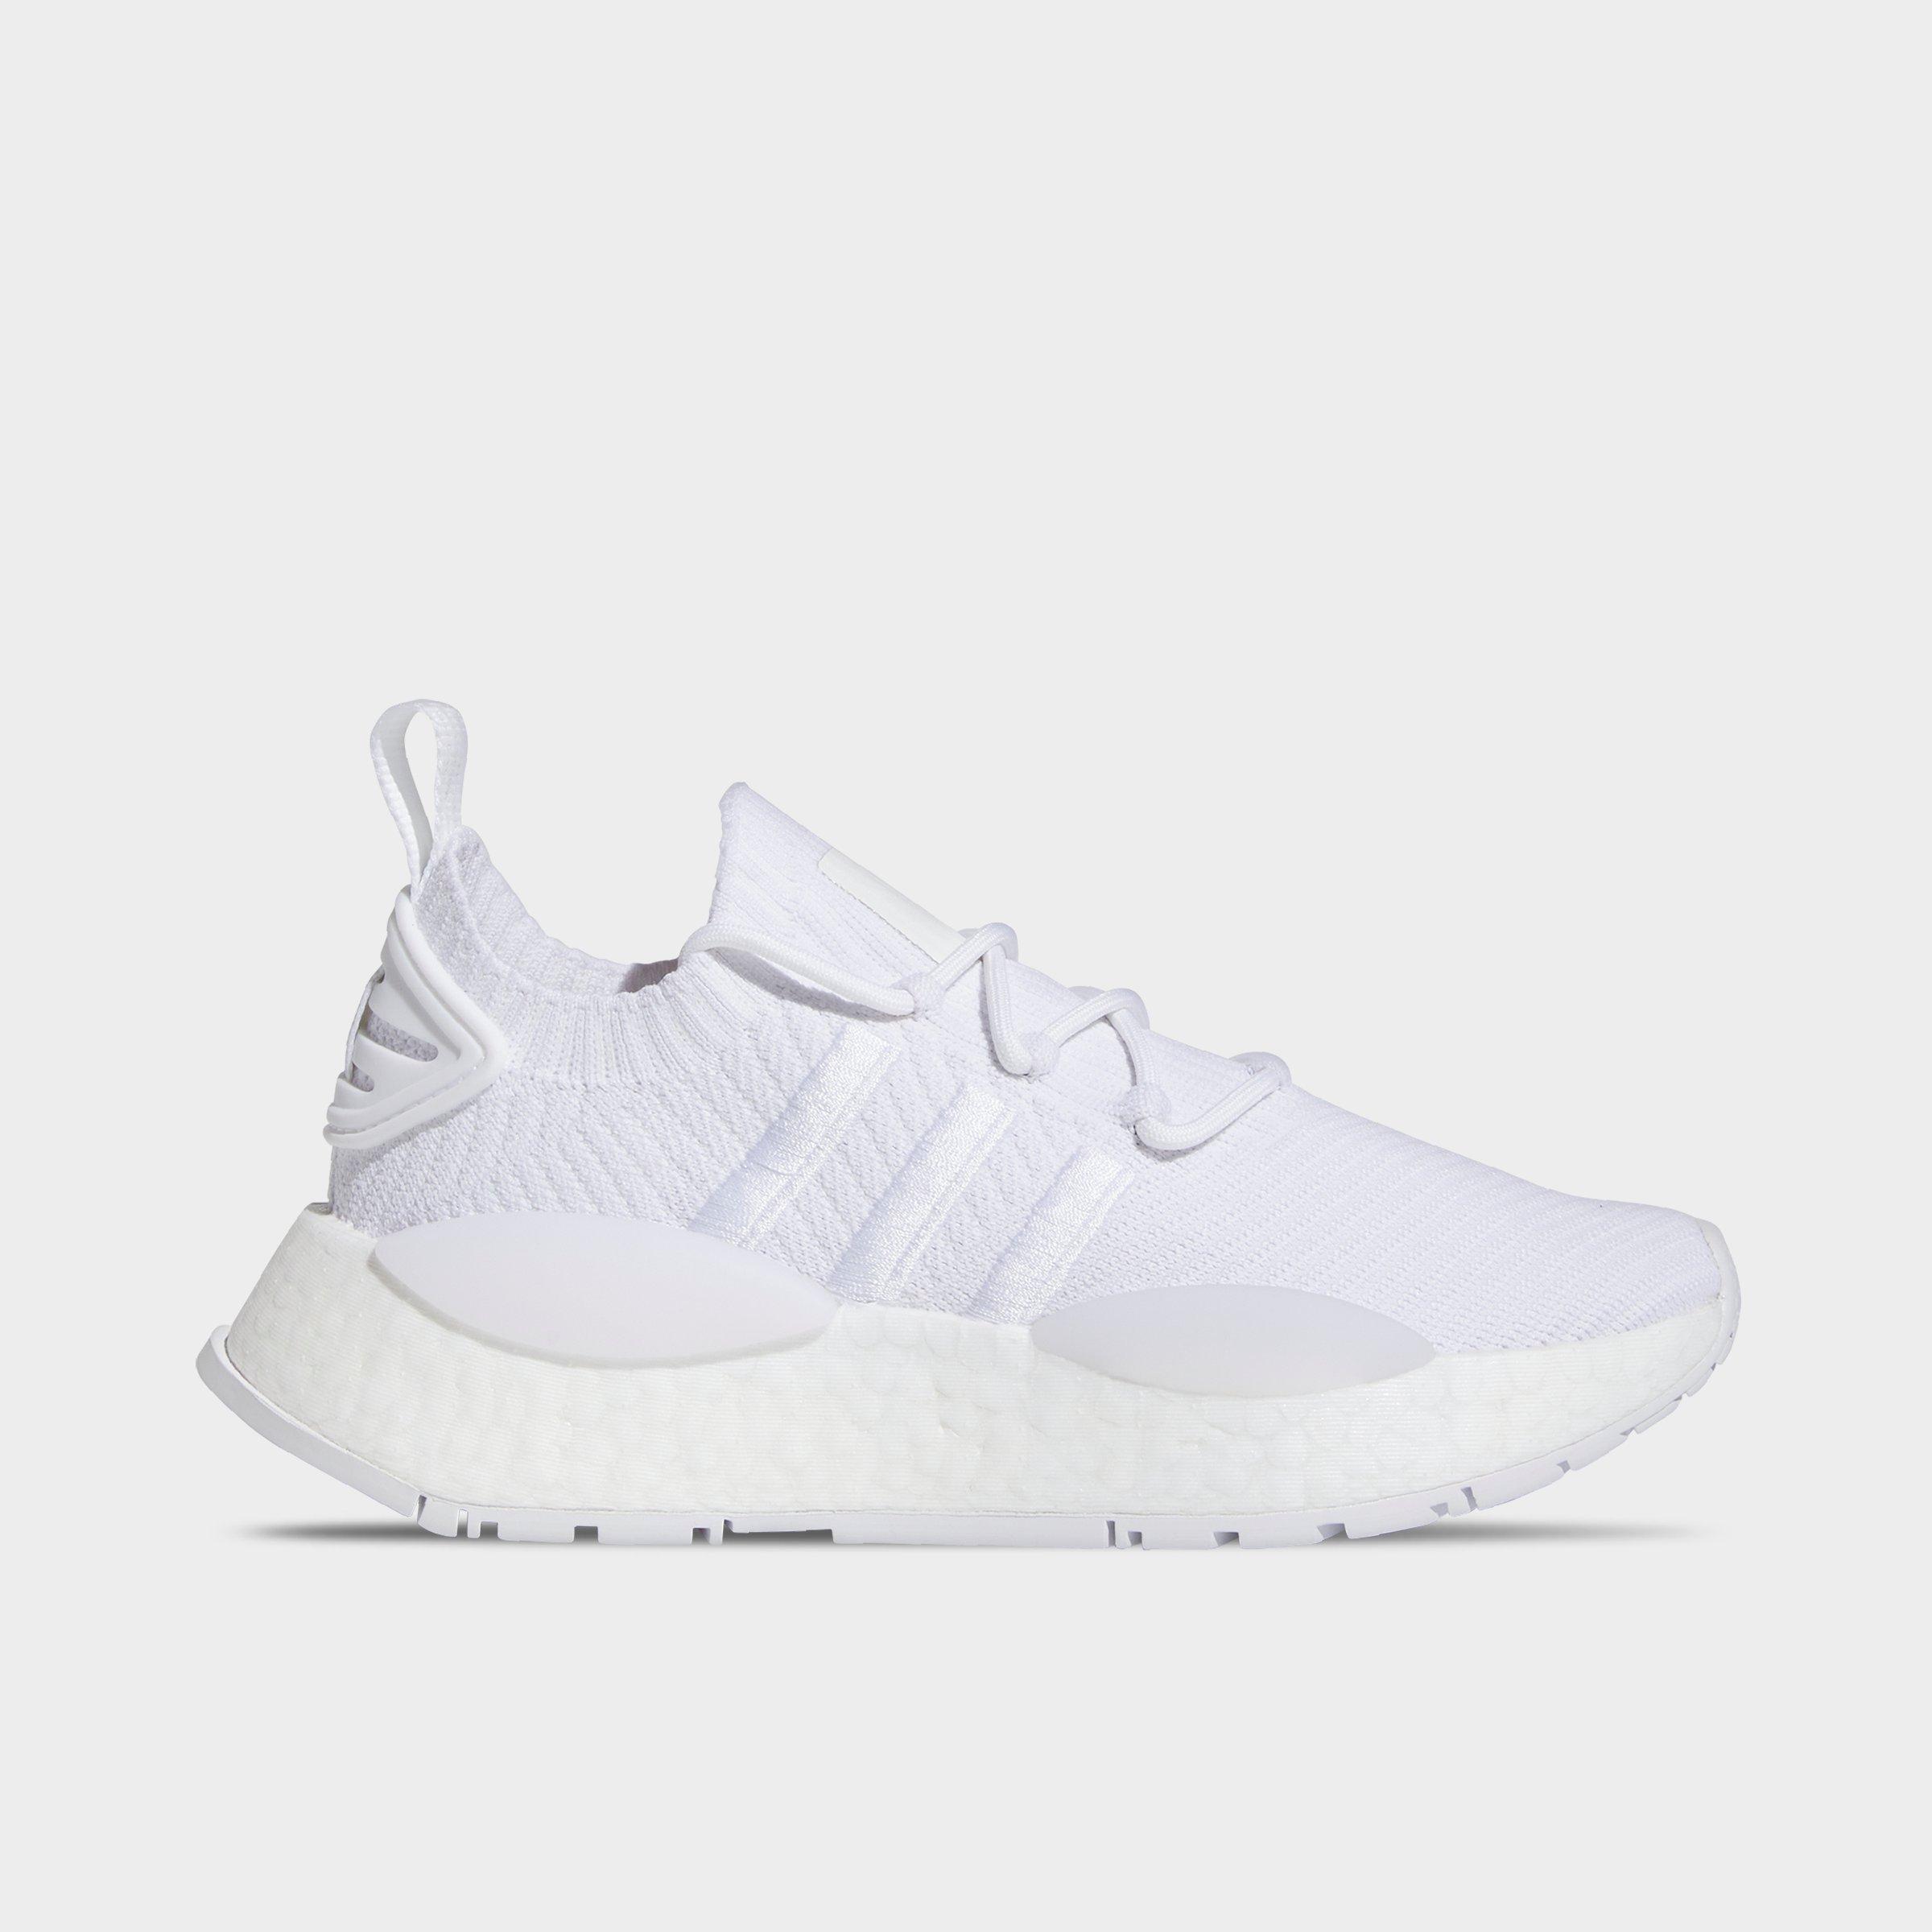 Adidas Originals Adidas Women's Originals Nmd W1 Casual Shoes In White/white/crystal White